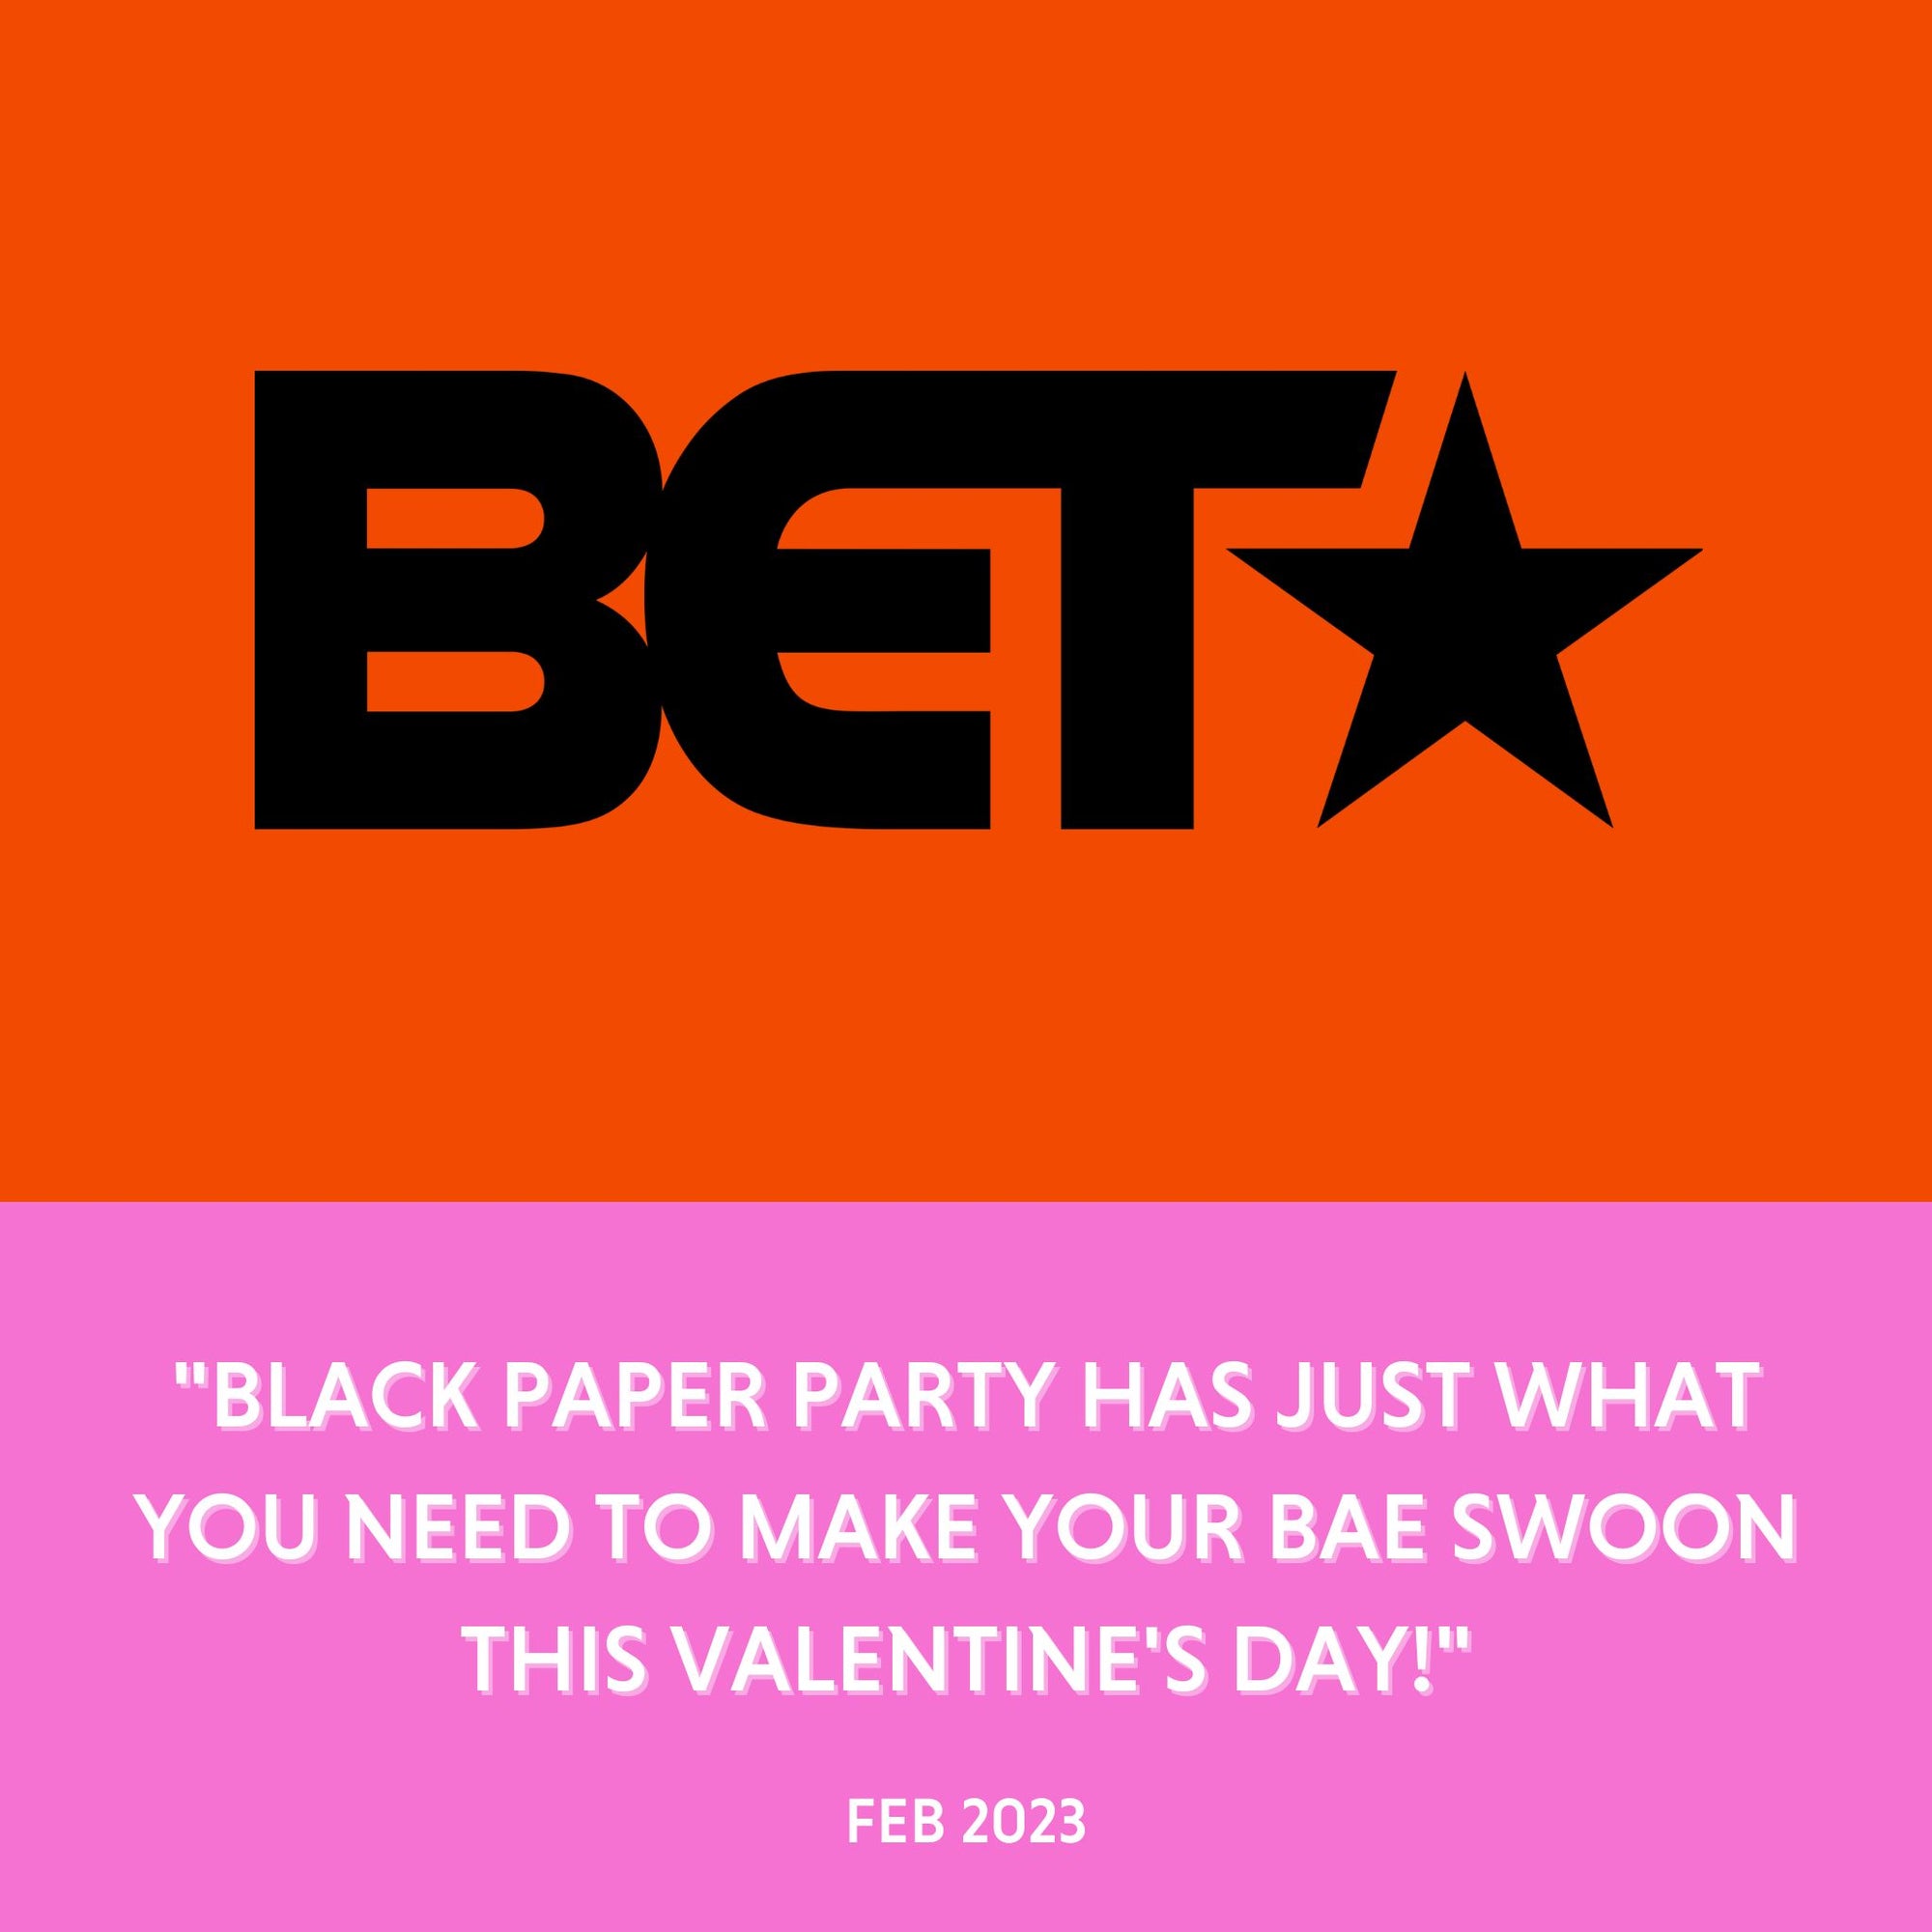 BET - "Black Paper Party Has Just What You Need To Make Your BAE Swoon This Valentine's Day!" - Feb 2023